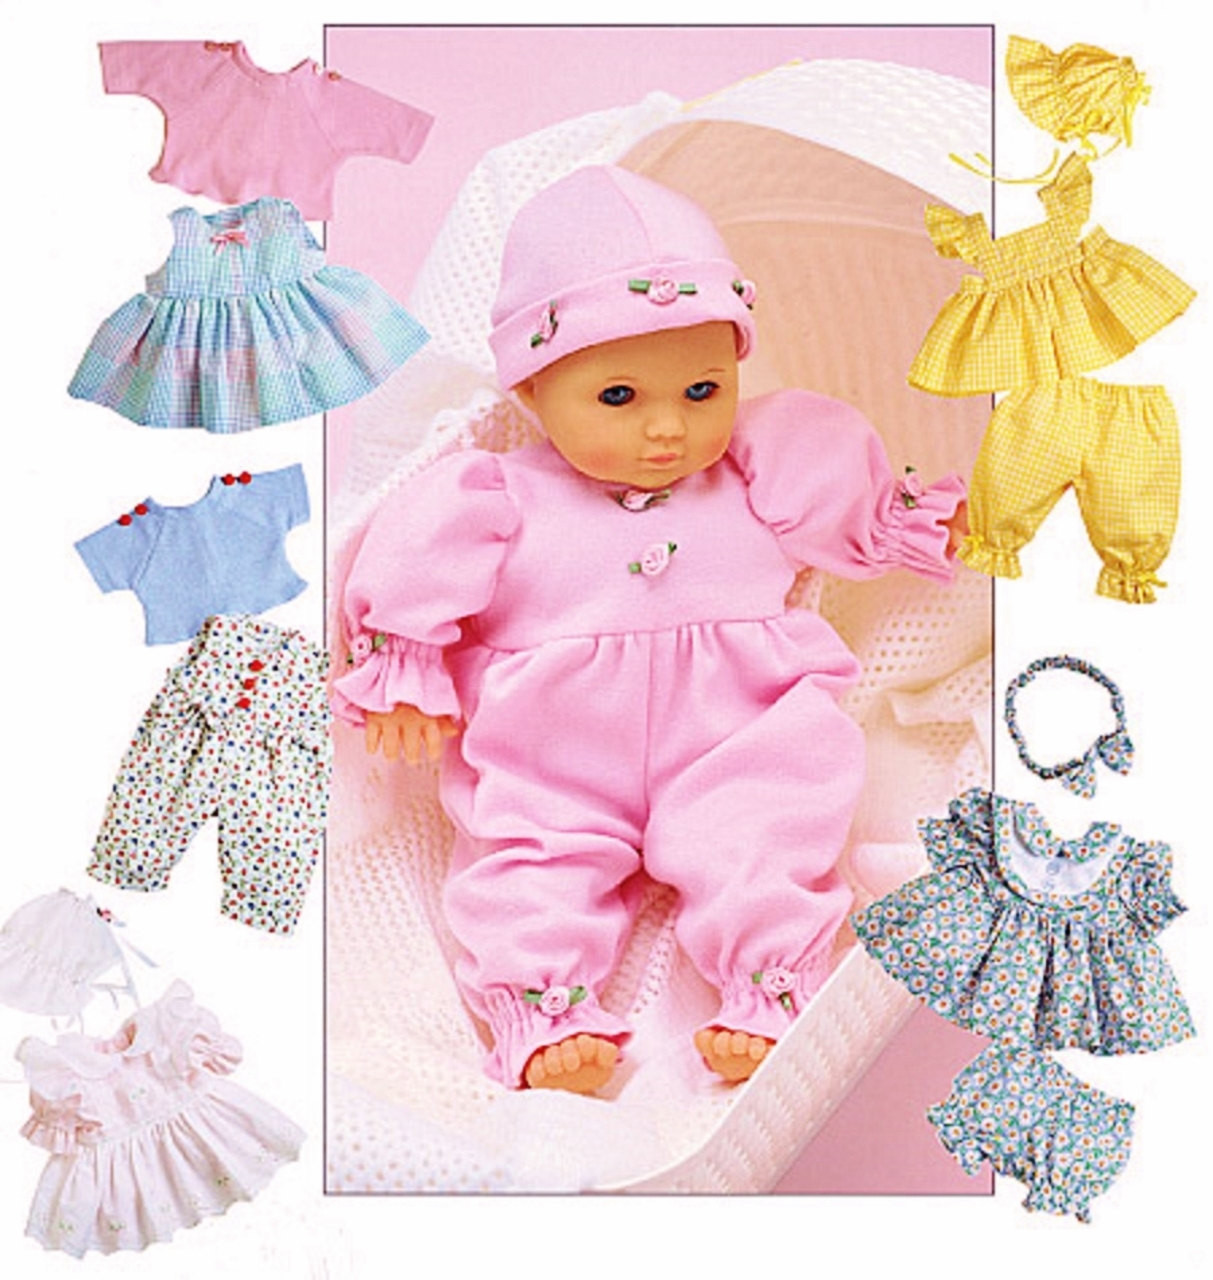 Baby Doll Fashion
 Baby Doll Clothes Pattern for Dolls 8 inches to 16 inches